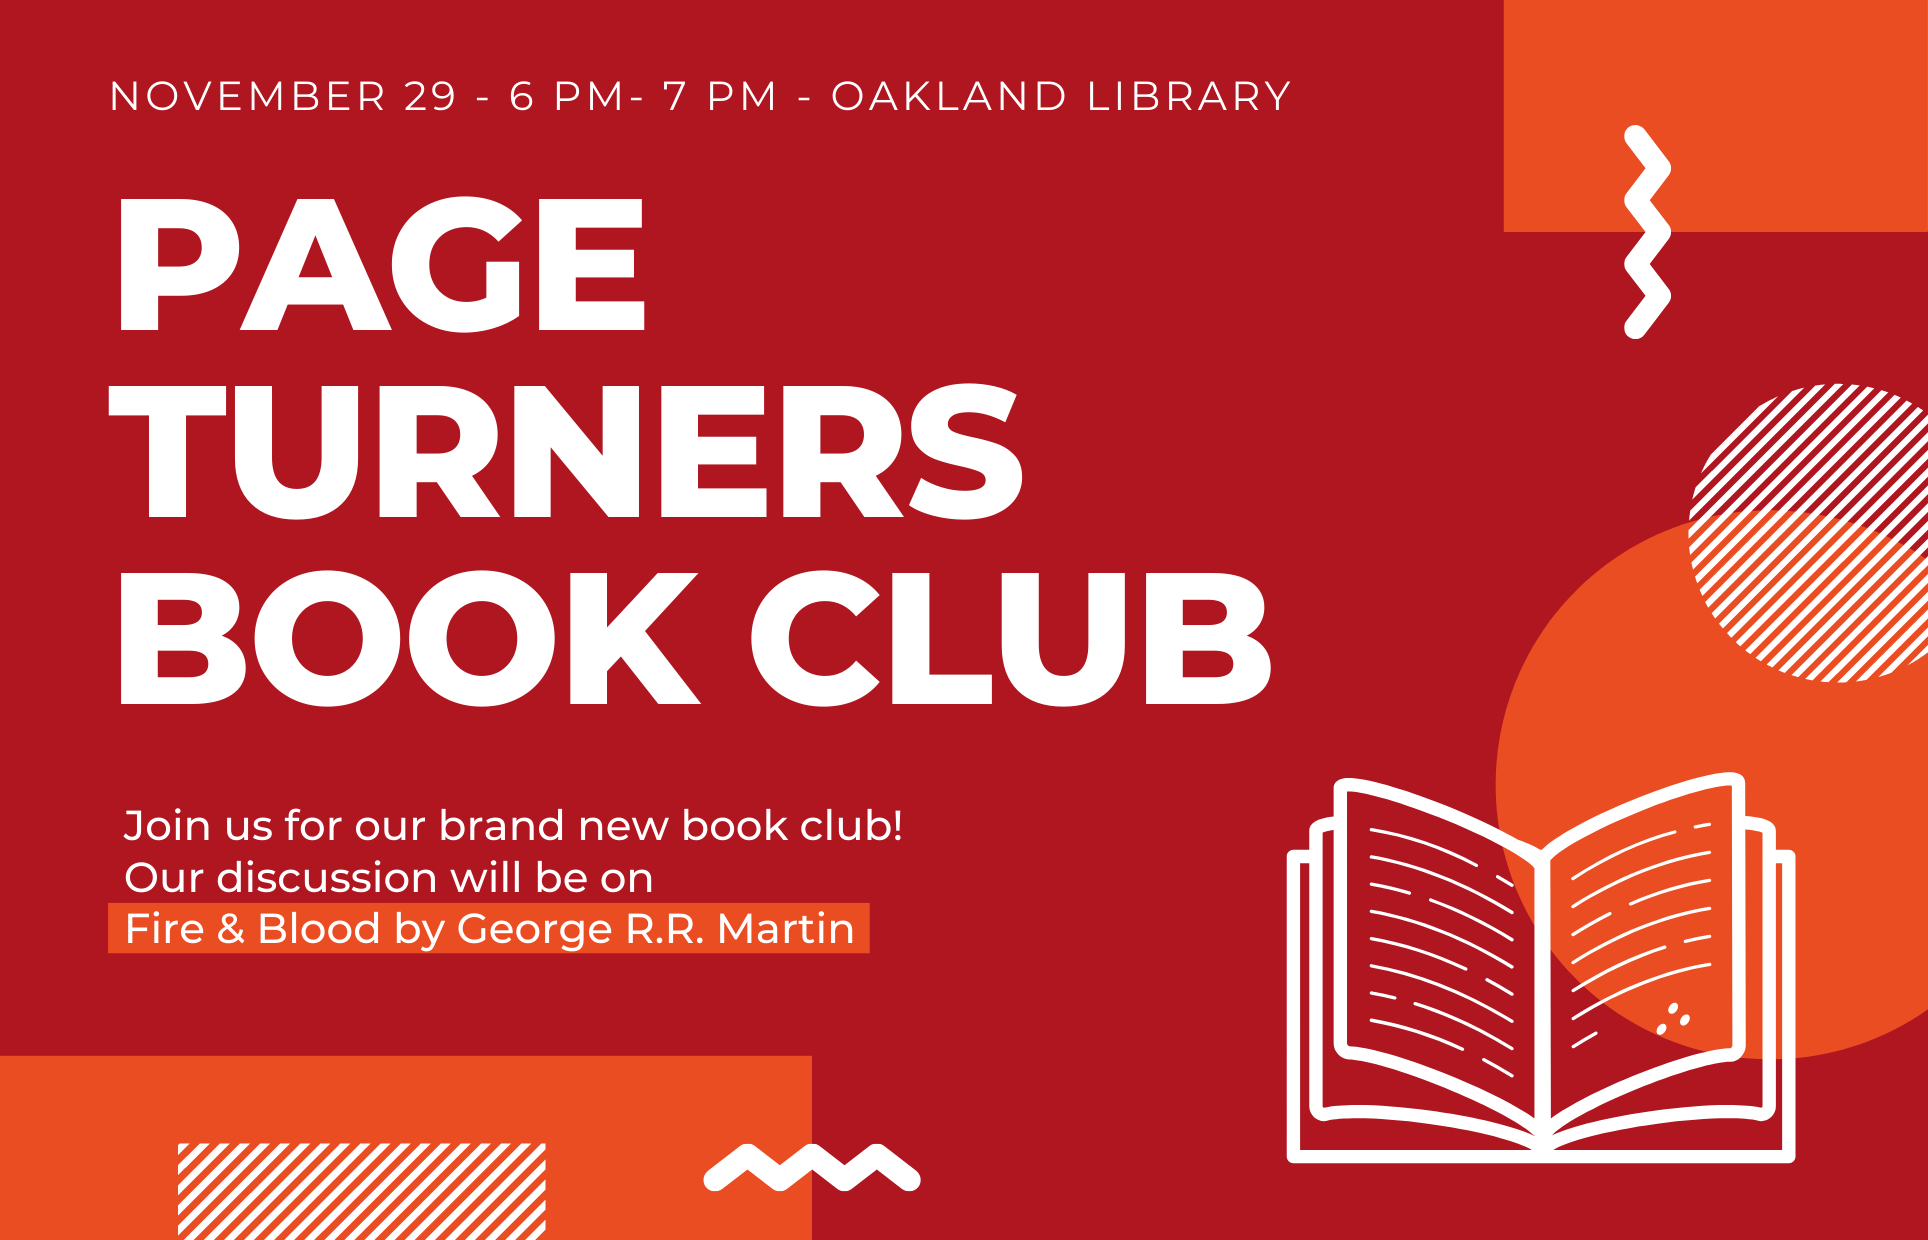 Page Turners Book Club Oakland